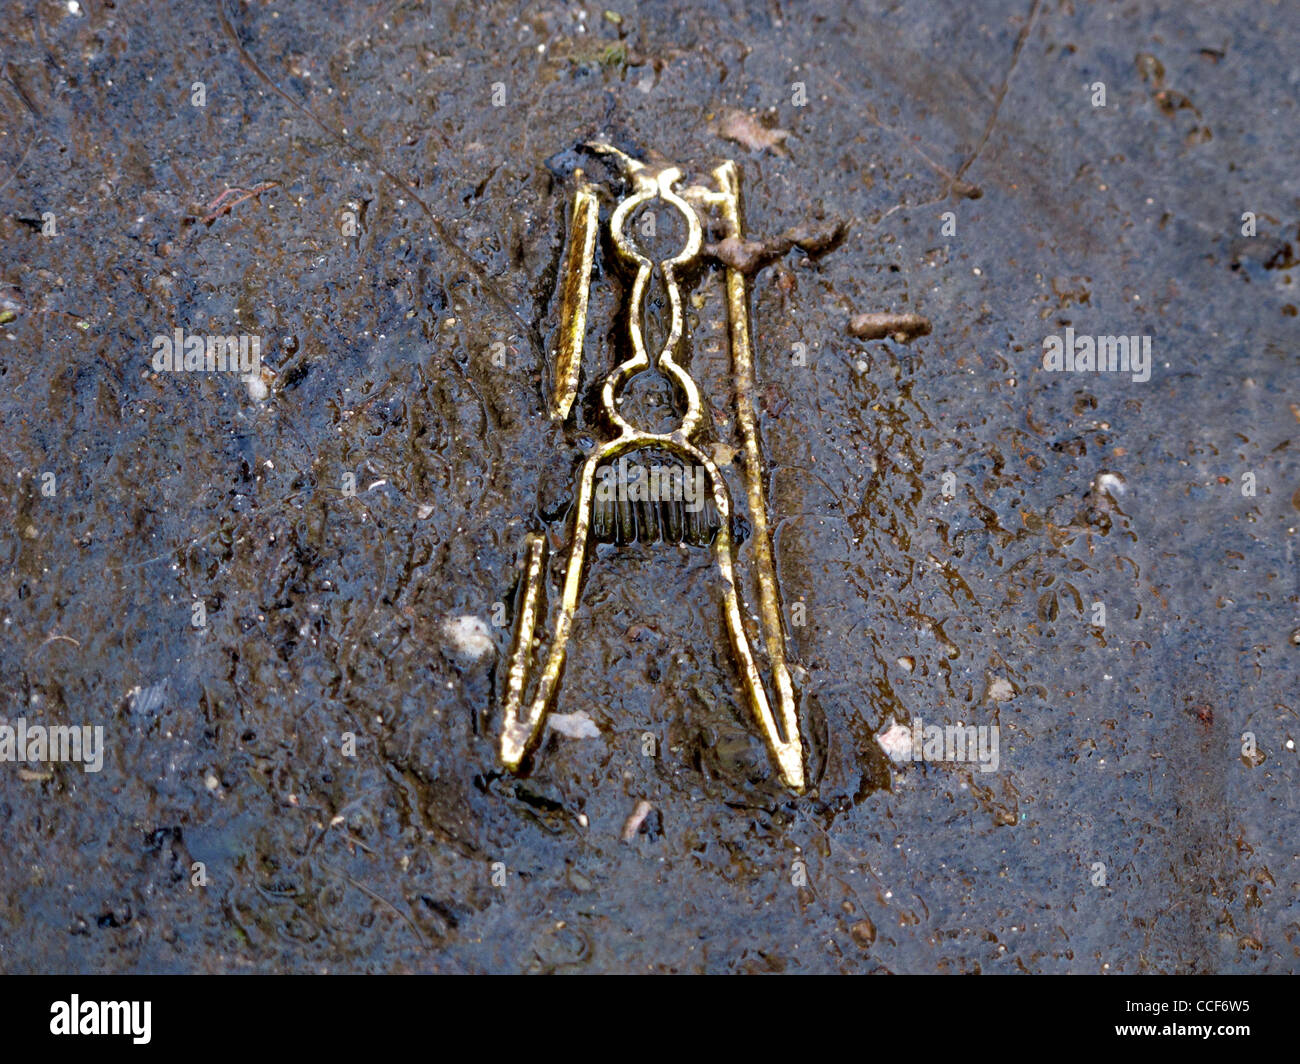 one old damaged clothes line peg on road surface Stock Photo